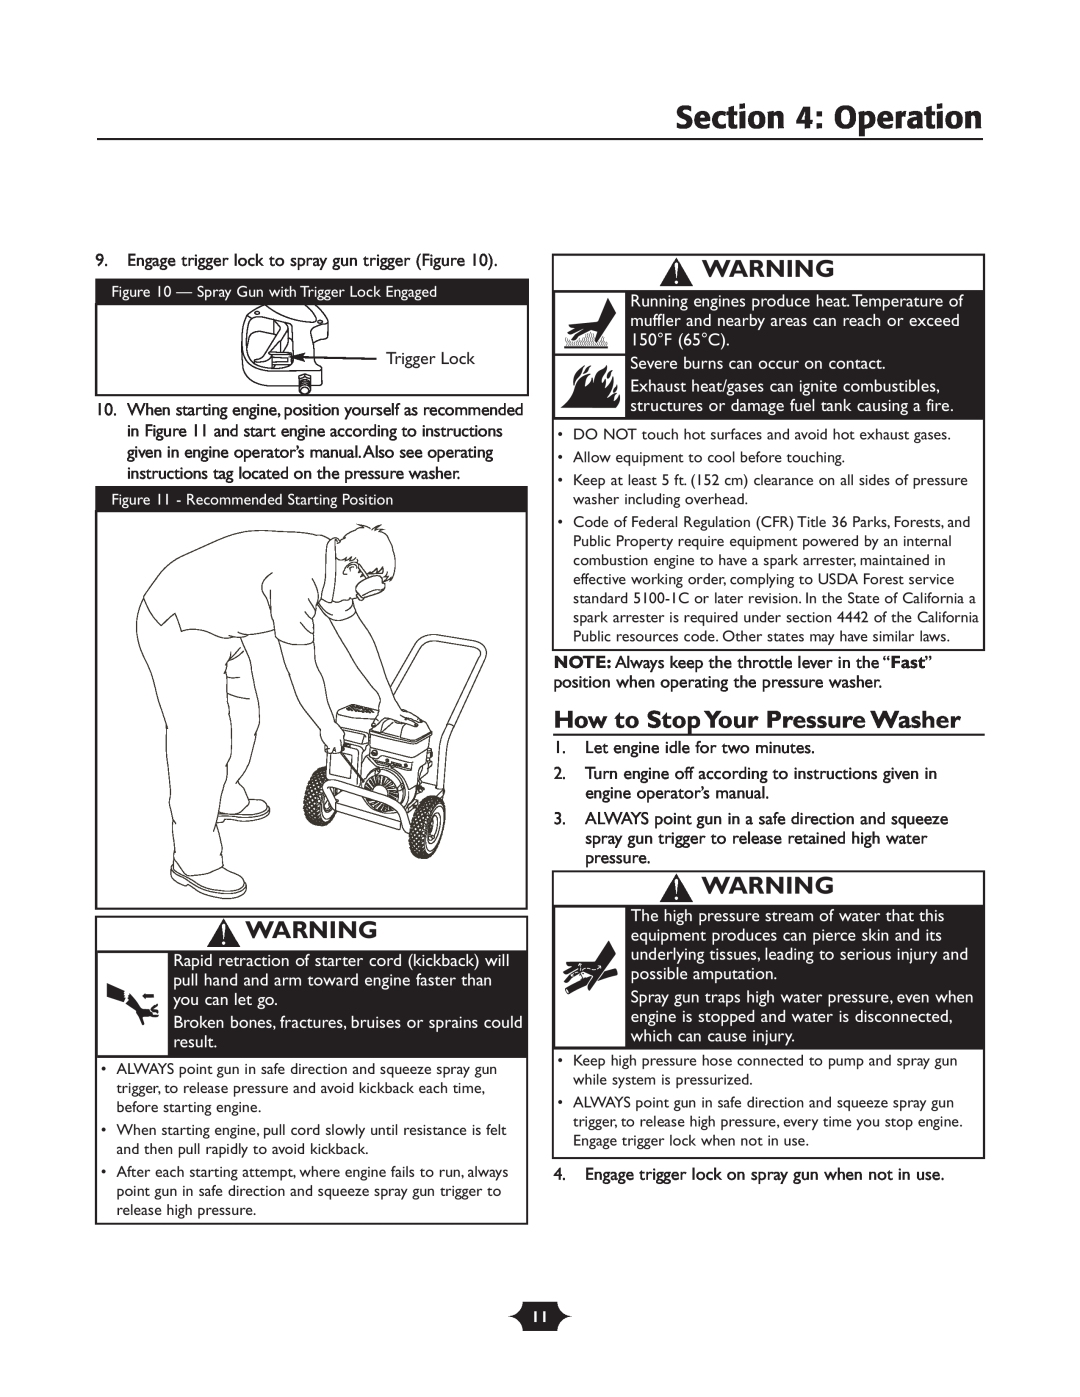 Troy-Bilt 020242-4 manual Operation, How to Stop Your Pressure Washer 